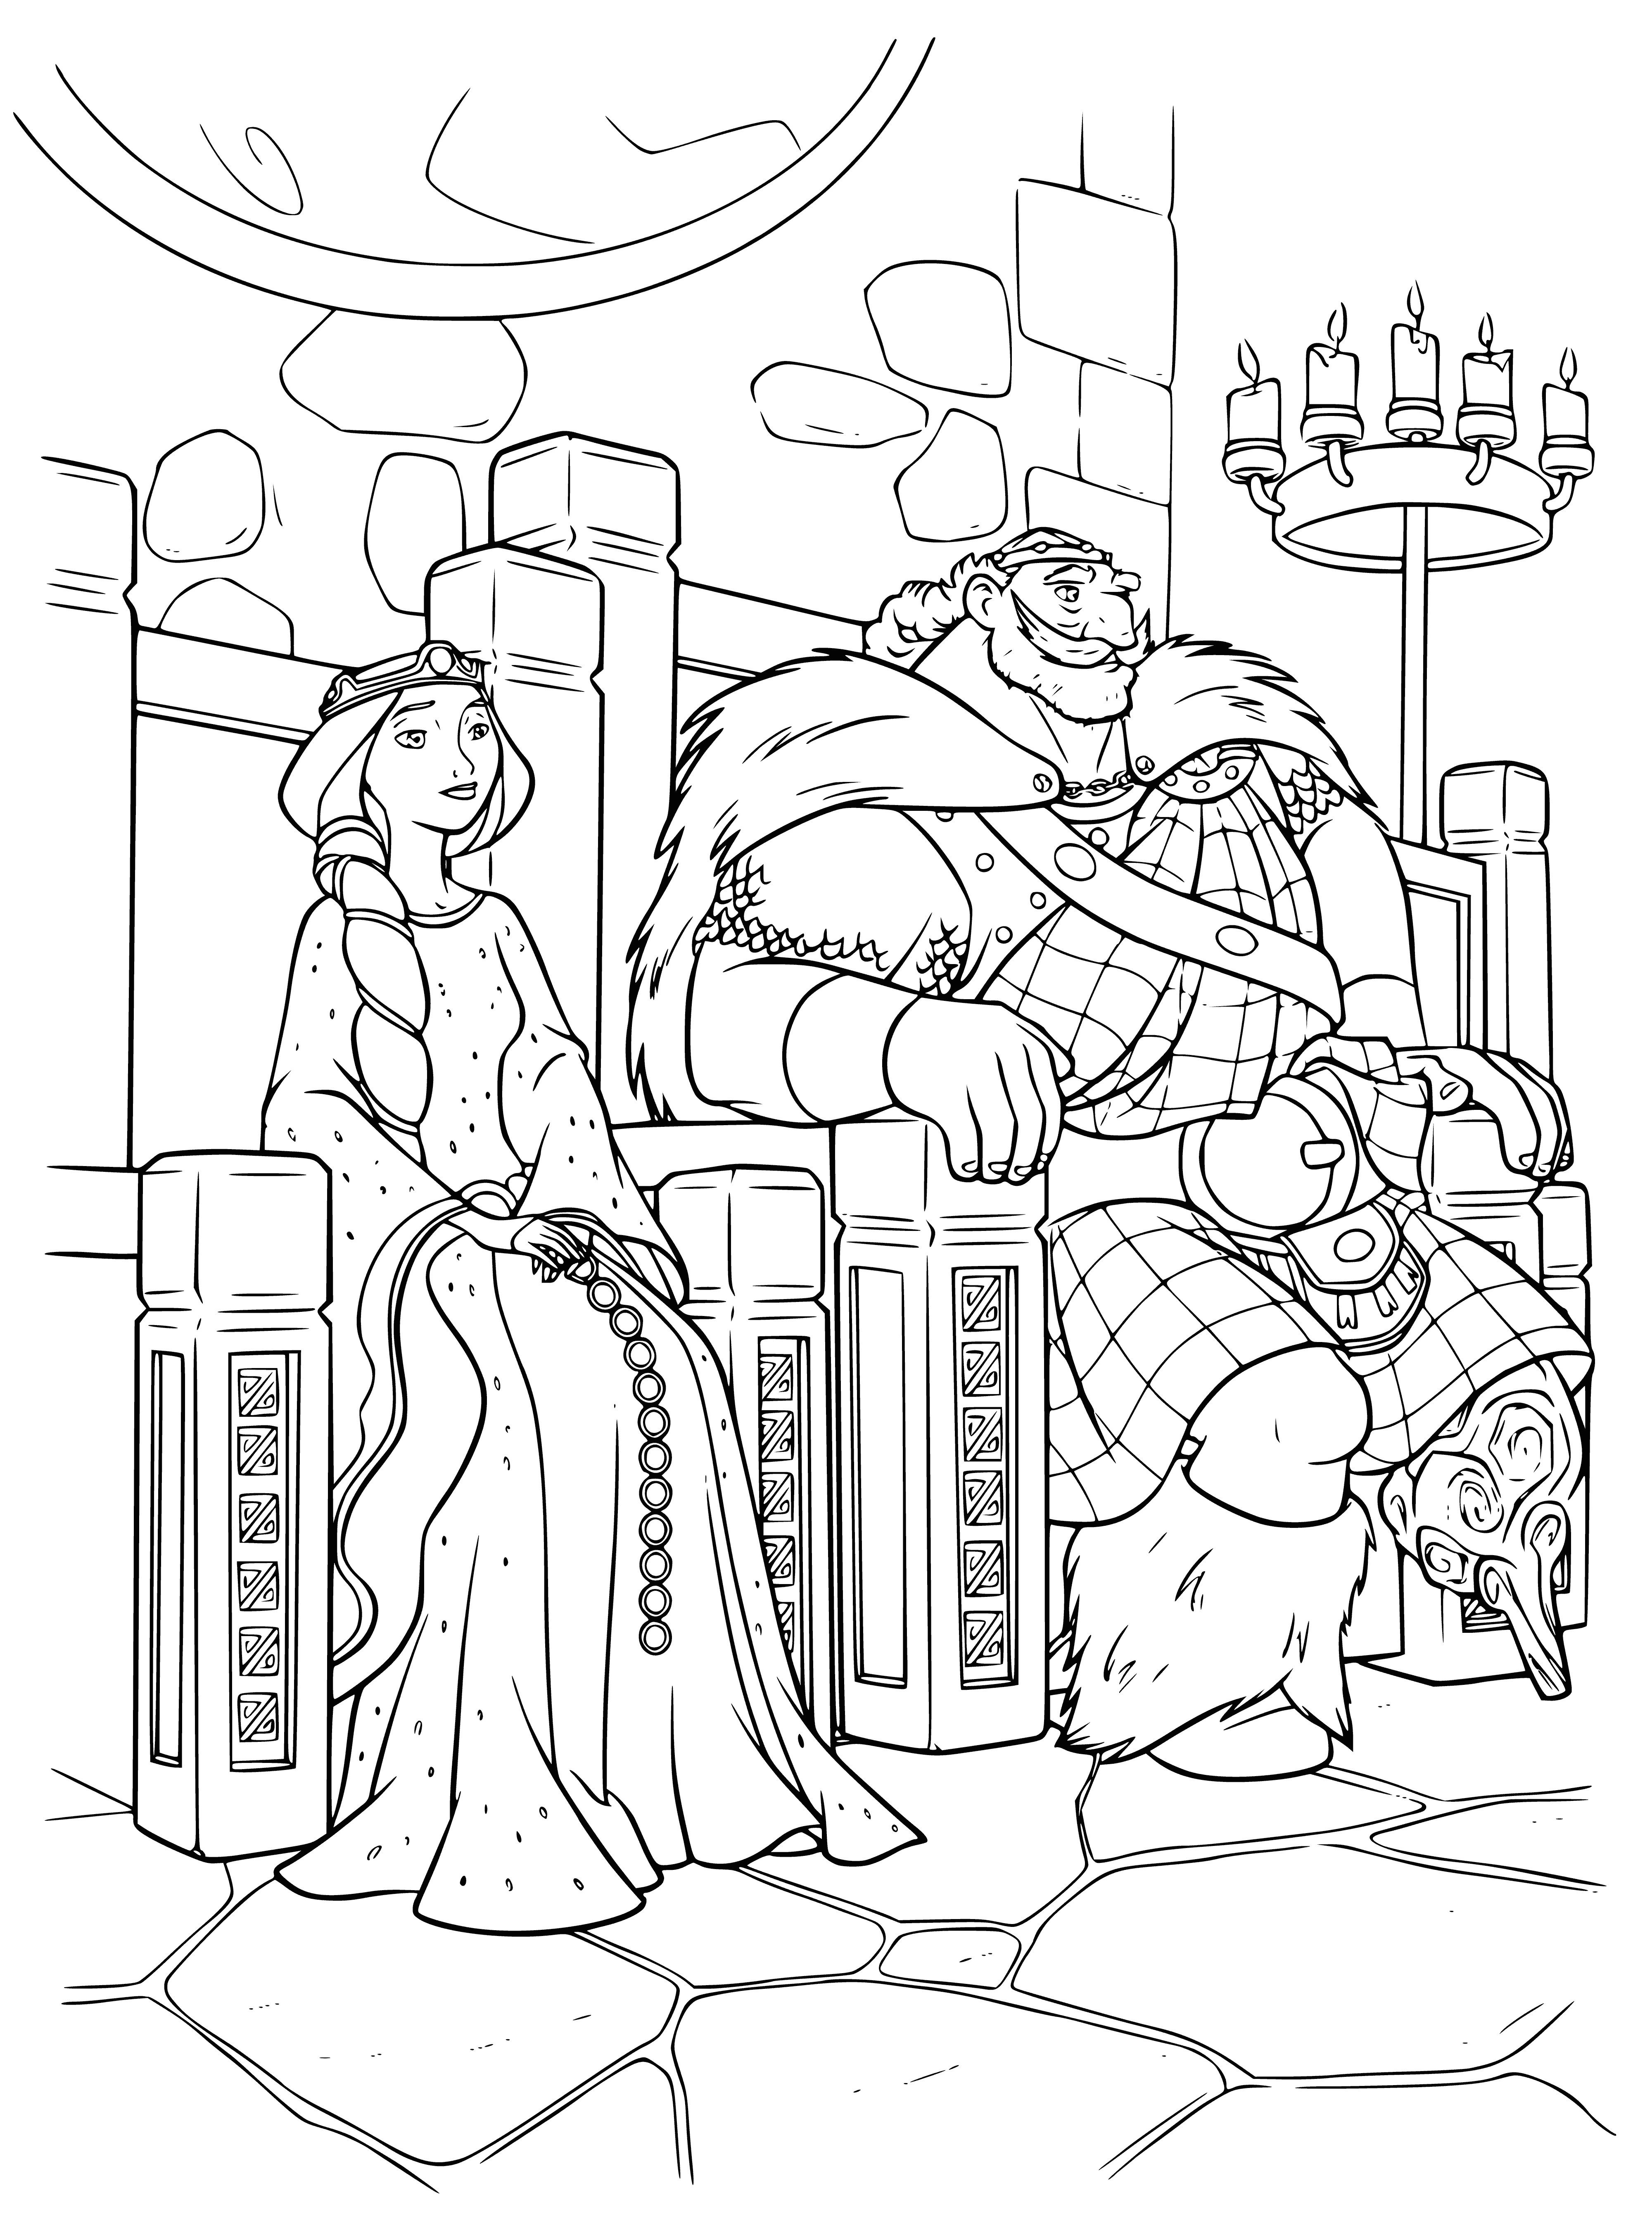 coloring page: King & queen on thrones, happy & content surrounded by court of jester & musician on a coloring page.